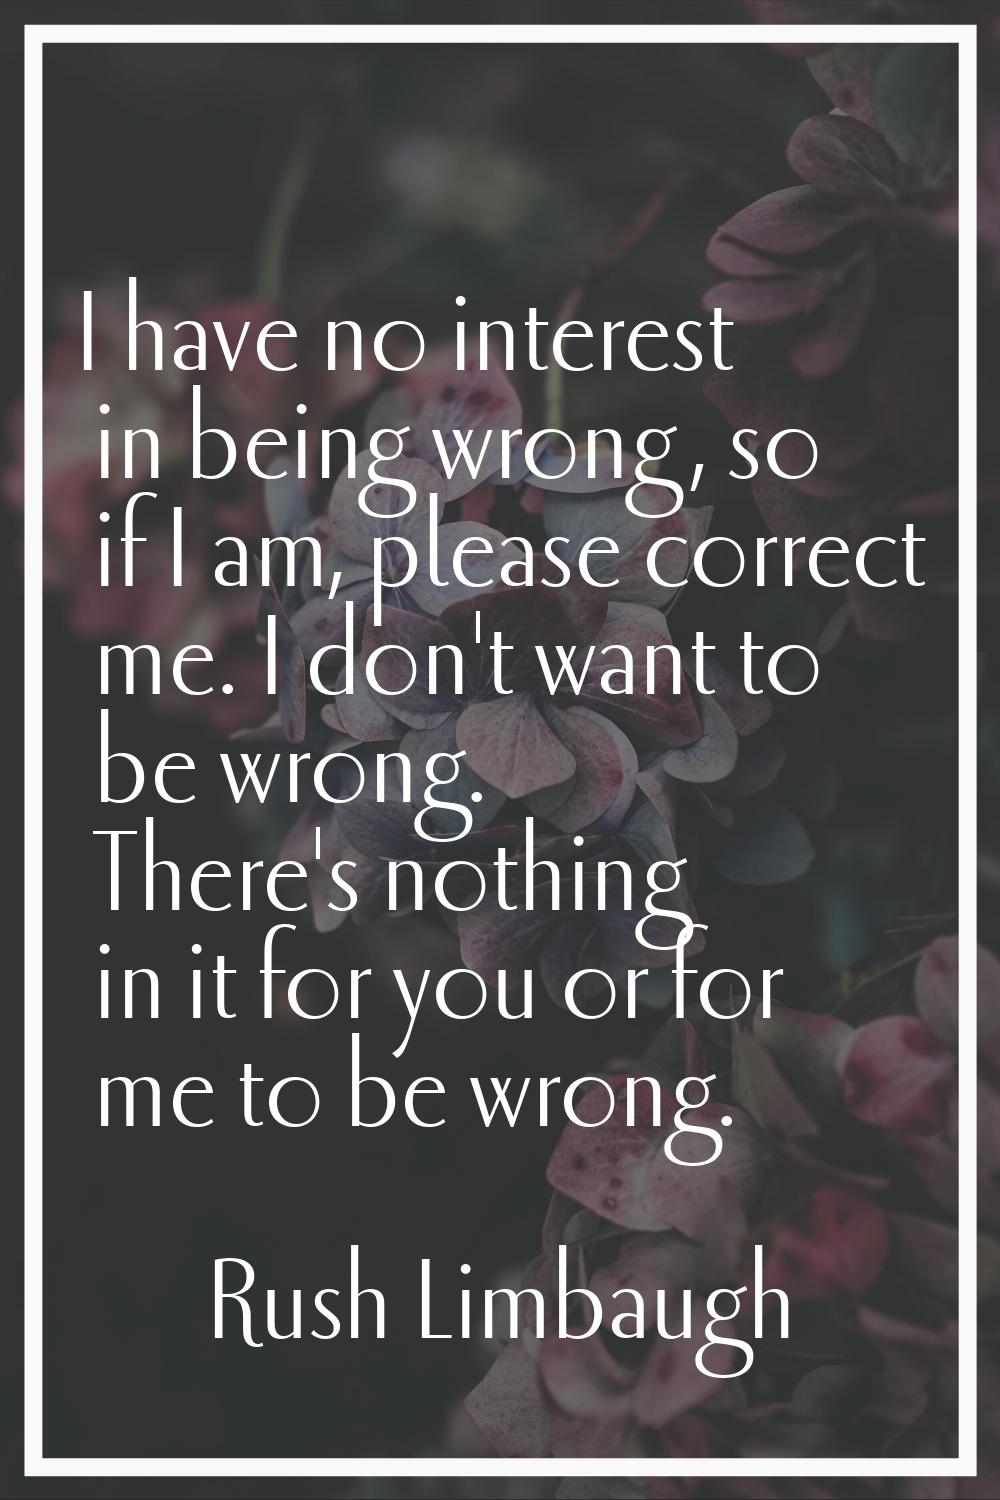 I have no interest in being wrong, so if I am, please correct me. I don't want to be wrong. There's